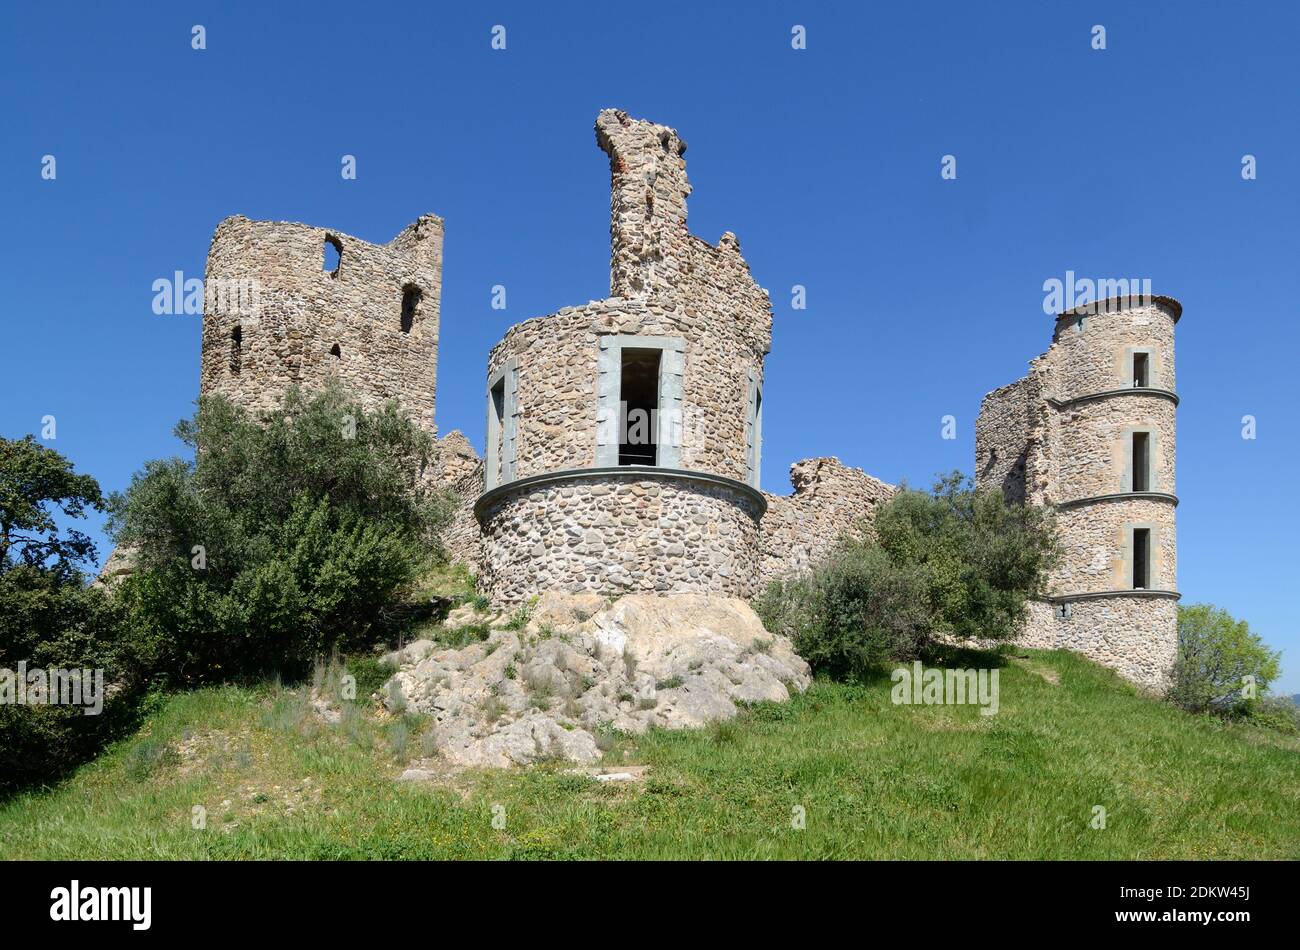 Round Stone Towers of the Ruined Château or Castle Ruins of Grimaud Castle Var Provence France Stock Photo